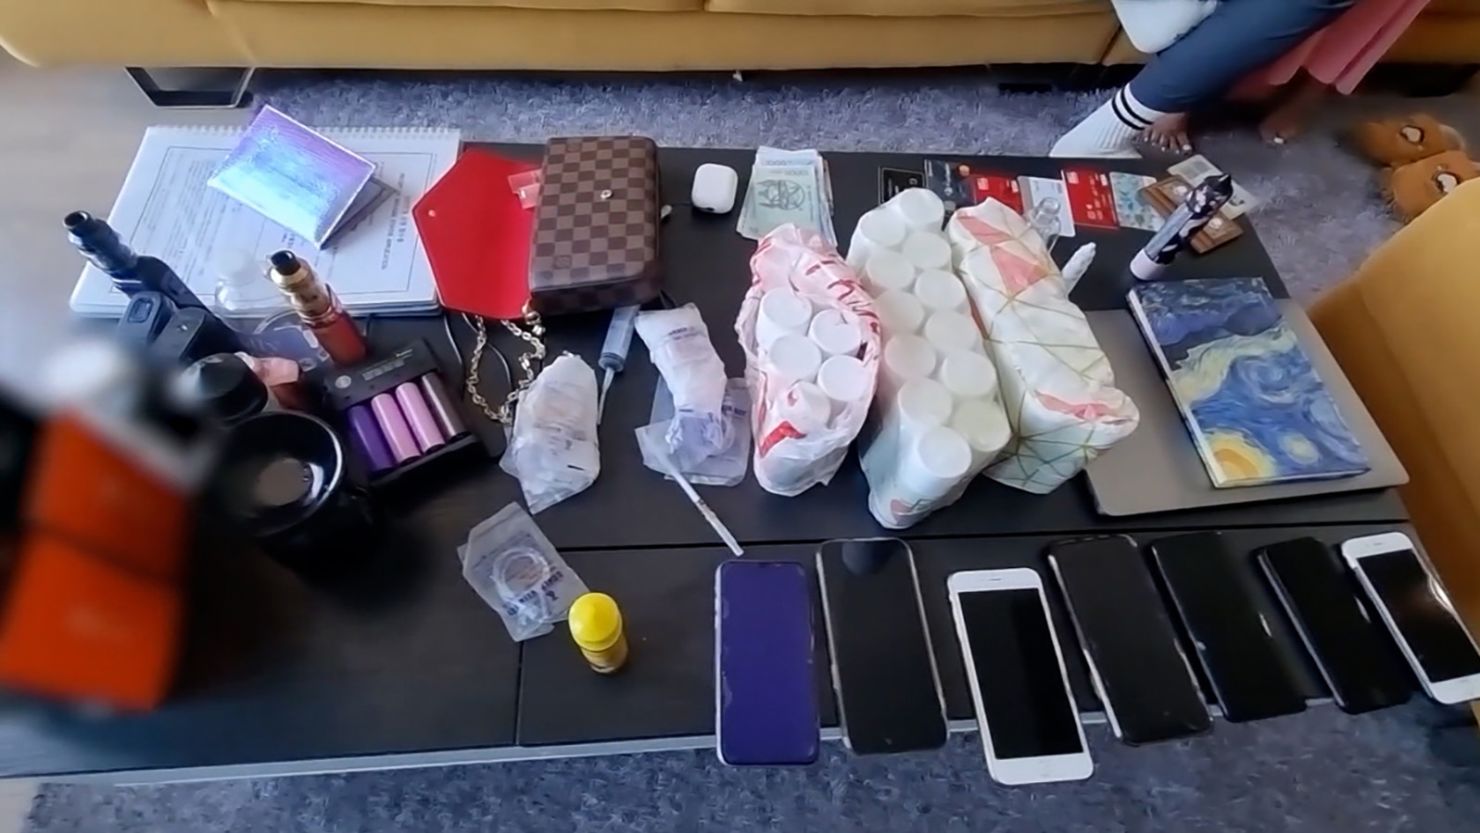 South Korean police display items seized during the raids.